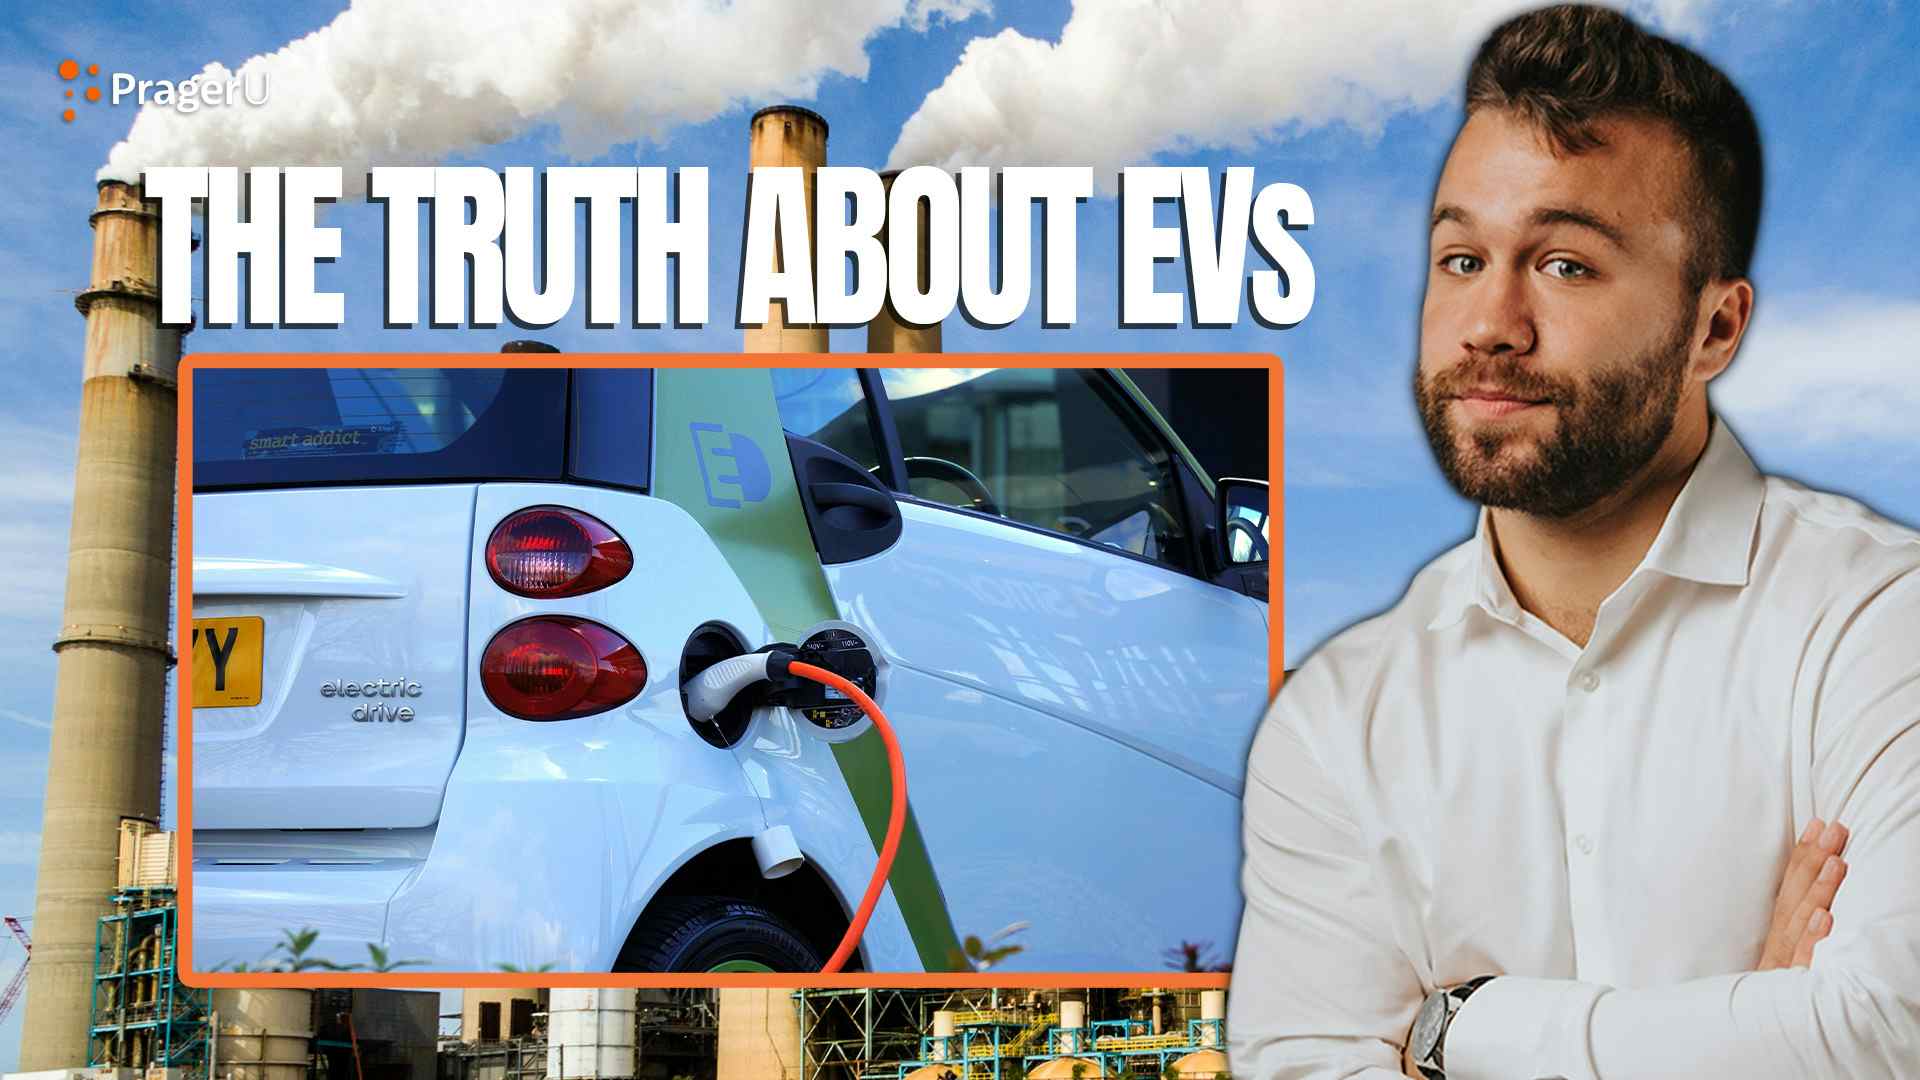 The Truth about EVs